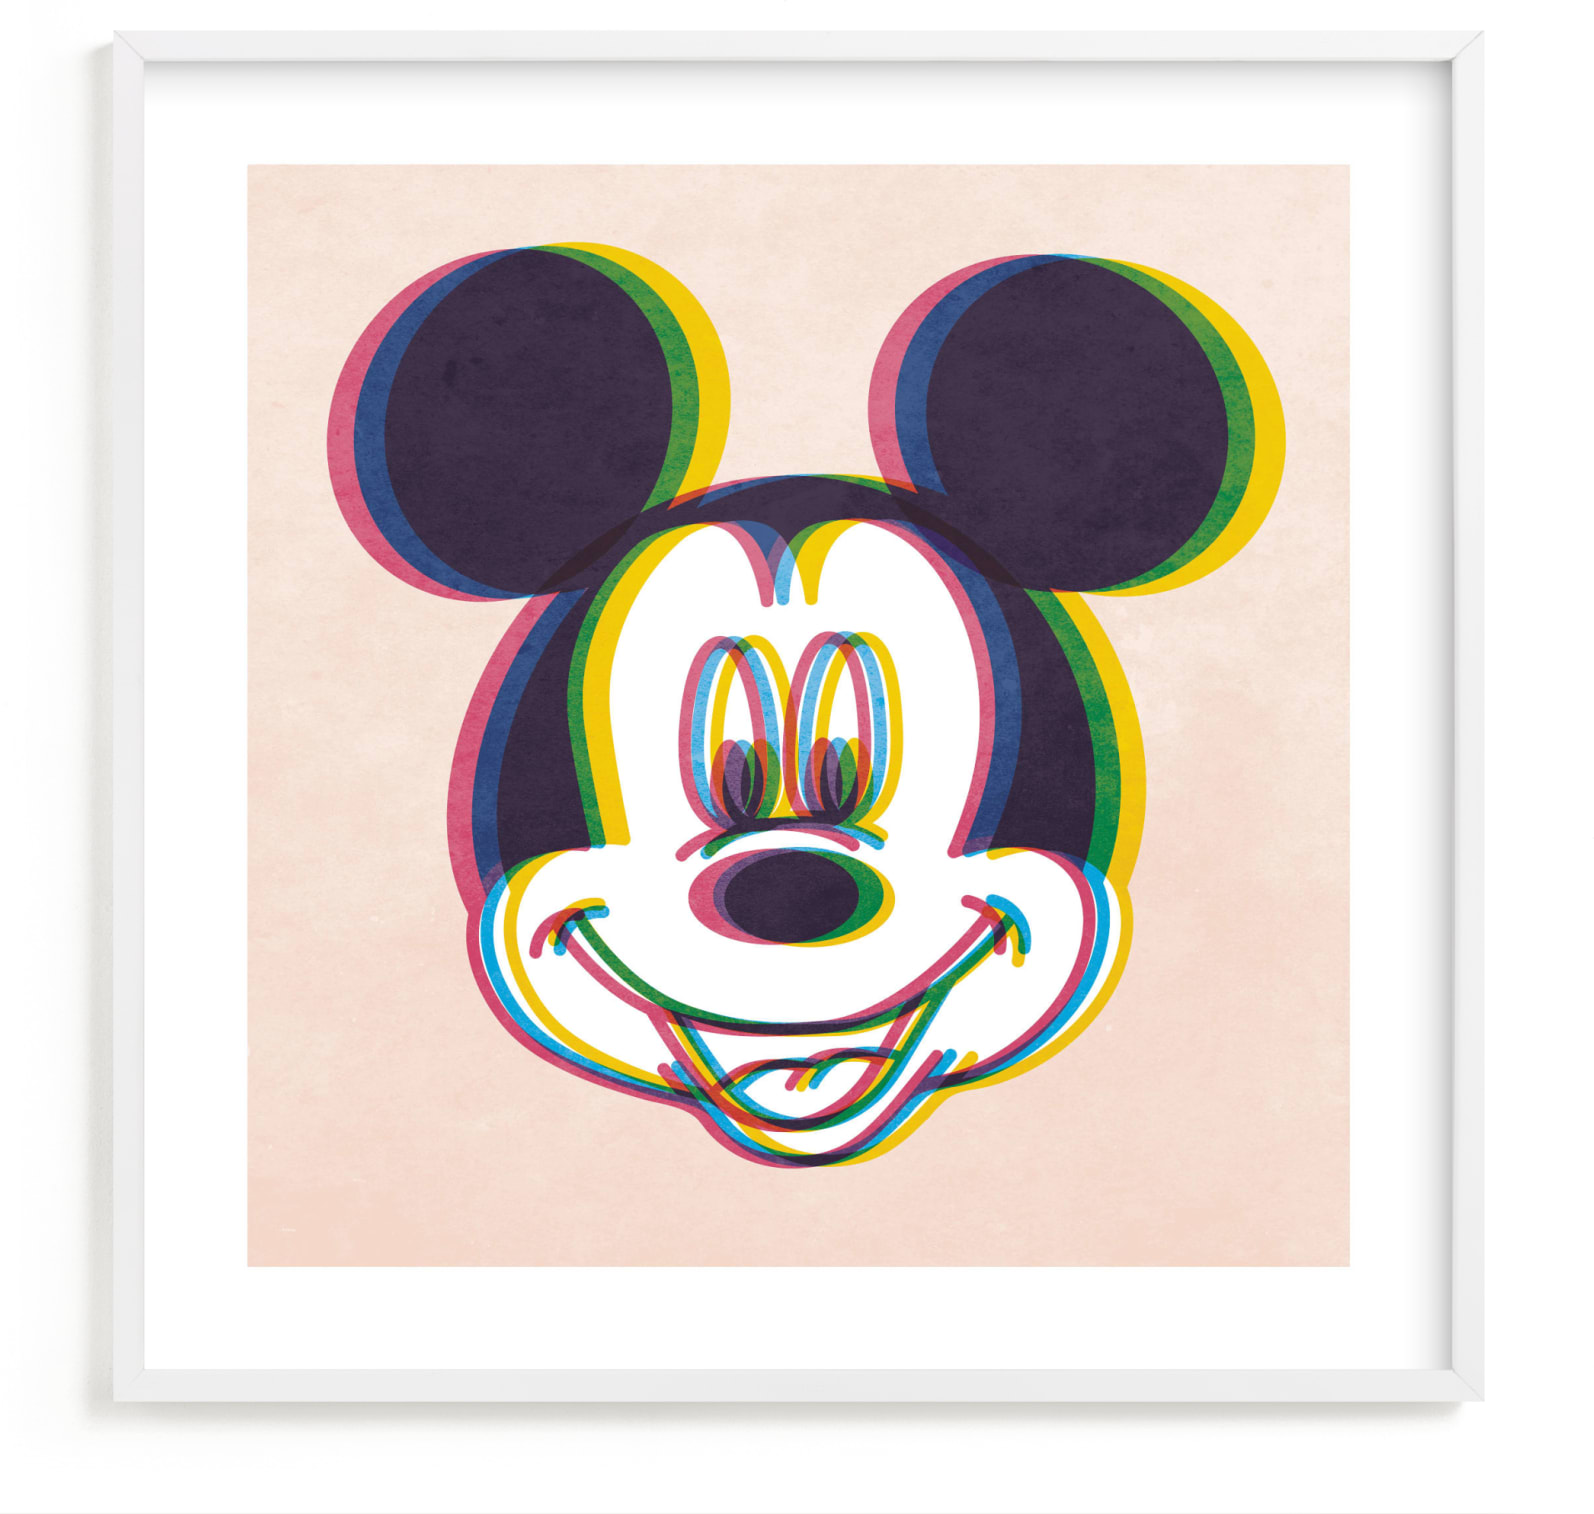 This is a blue, yellow, pink disney art by Igor called Disney's Mickey Glitch.